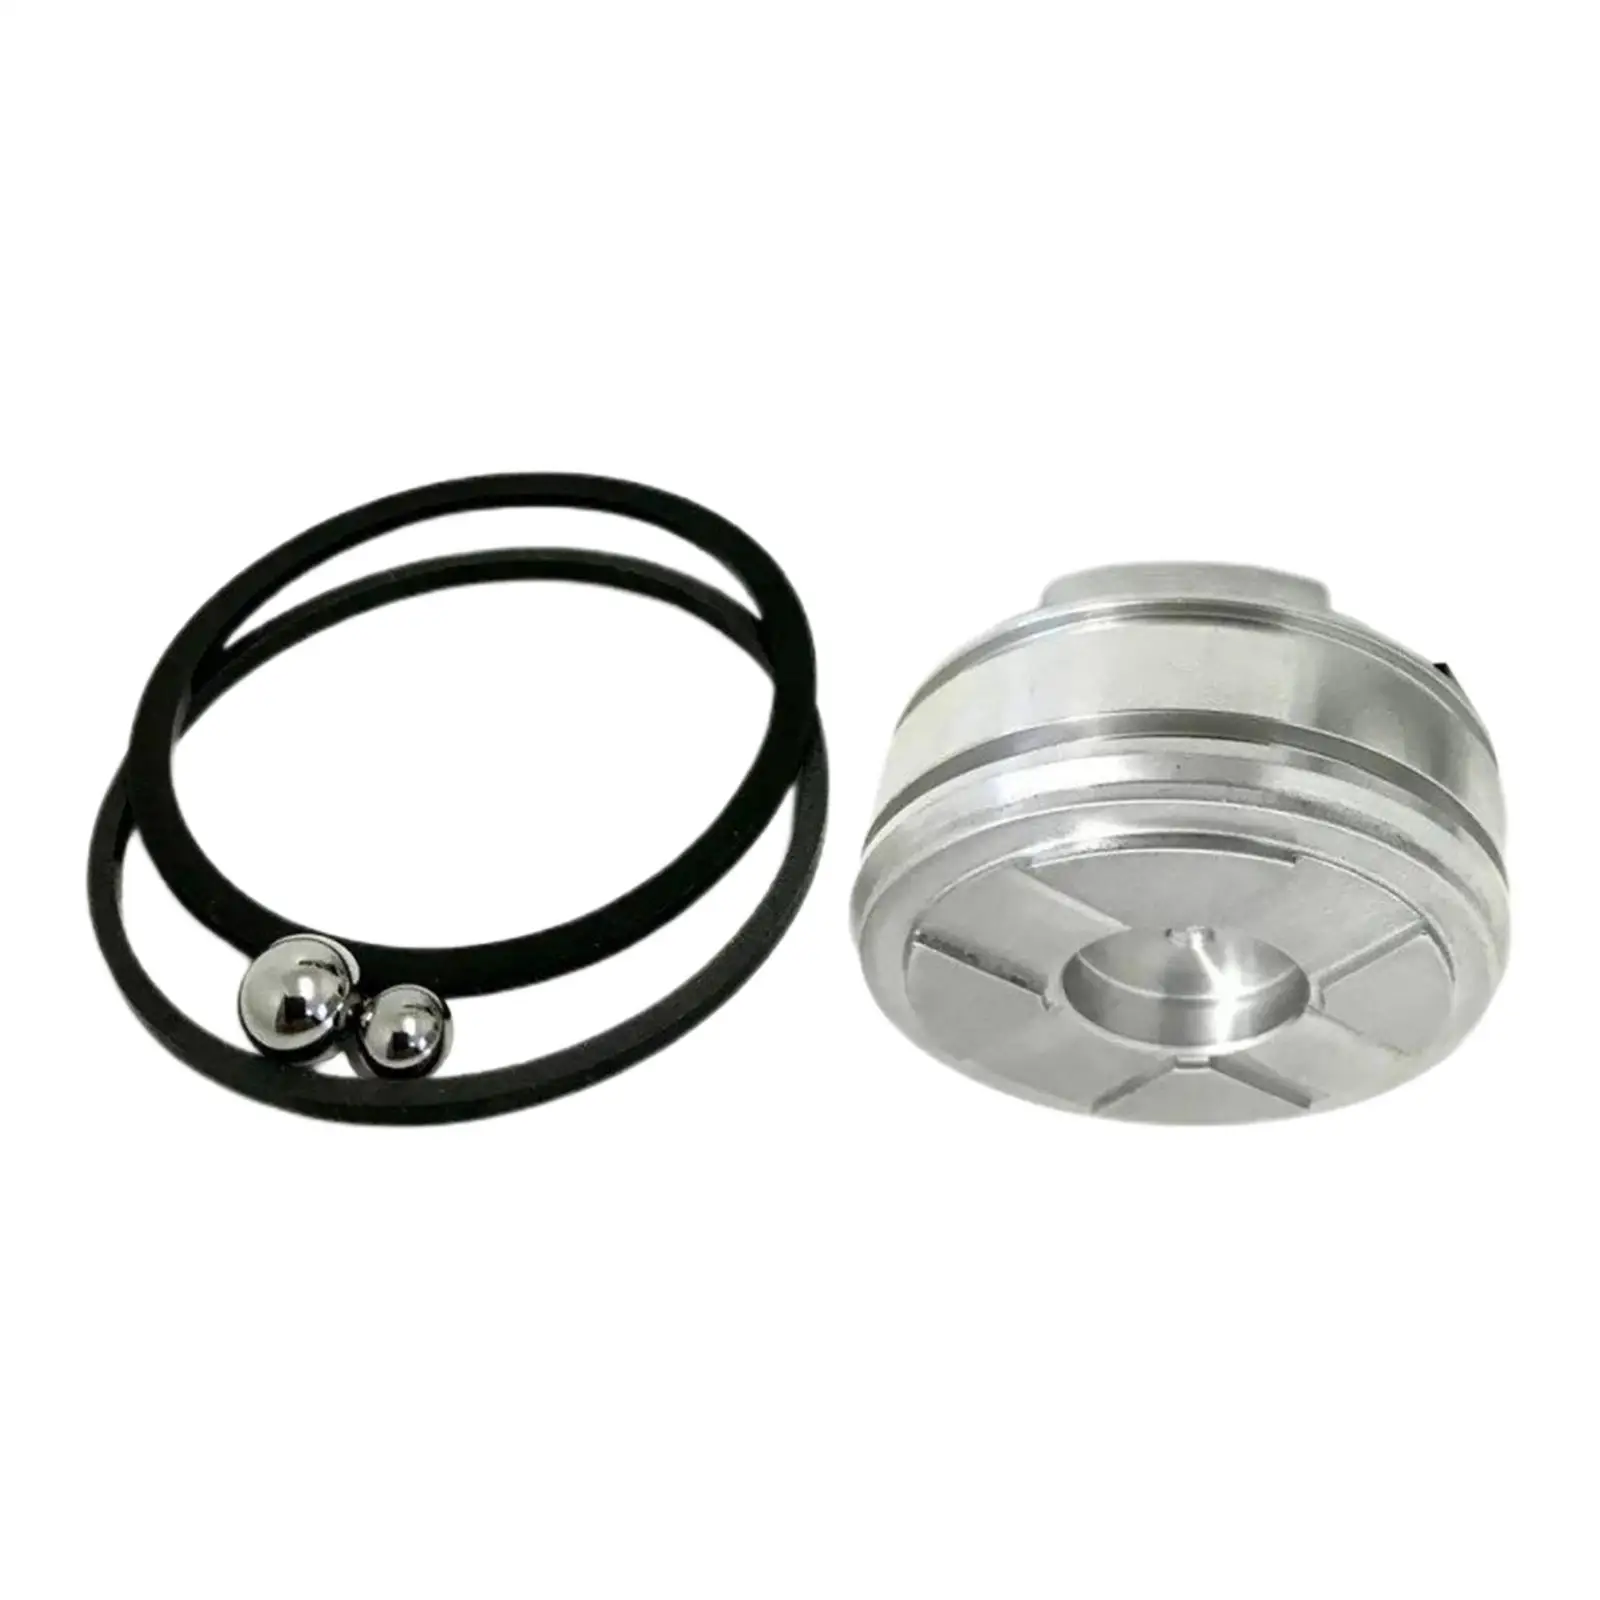 Car Pinless Energy Accumulator Piston Set High performance 4L60E 4L60 77998-03K for upgrade Replaces Parts Modification